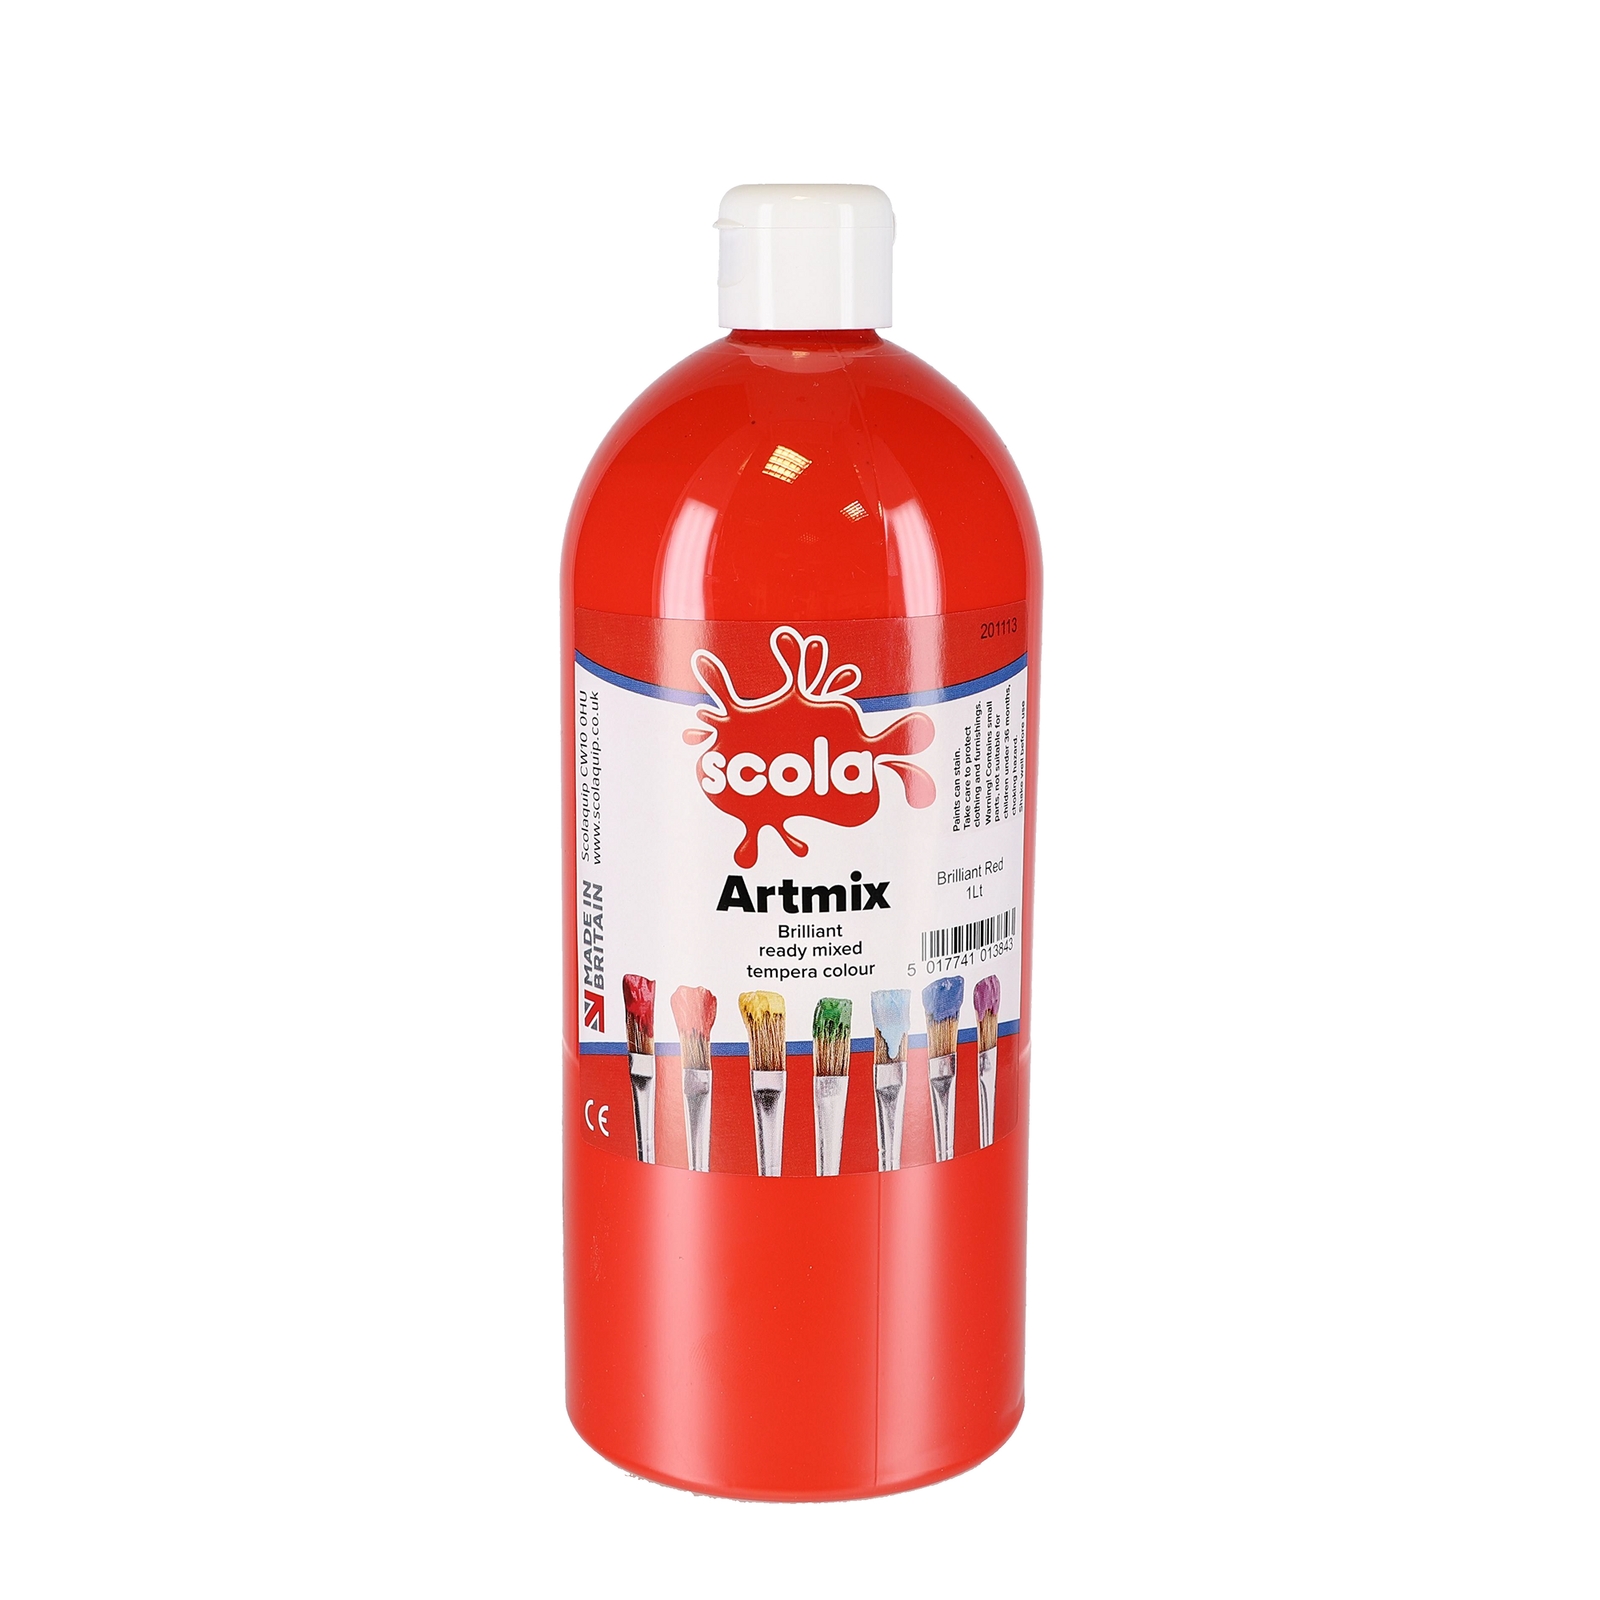 Scola Brilliant Red Artmix Ready Mixed Paint - 1 Litre - Each